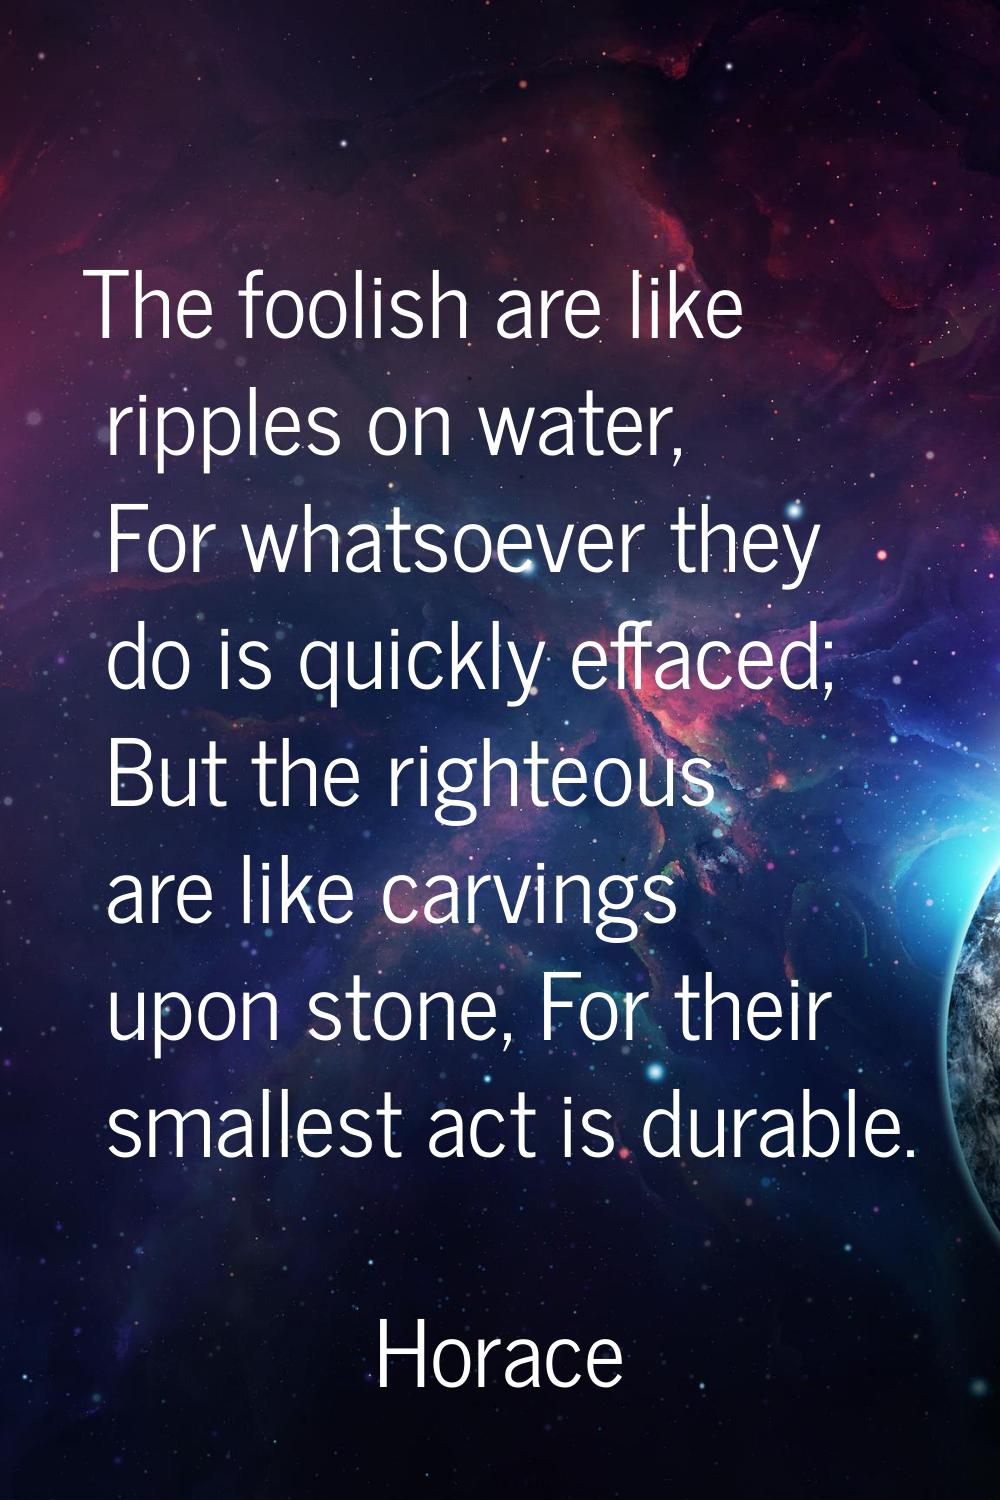 The foolish are like ripples on water, For whatsoever they do is quickly effaced; But the righteous